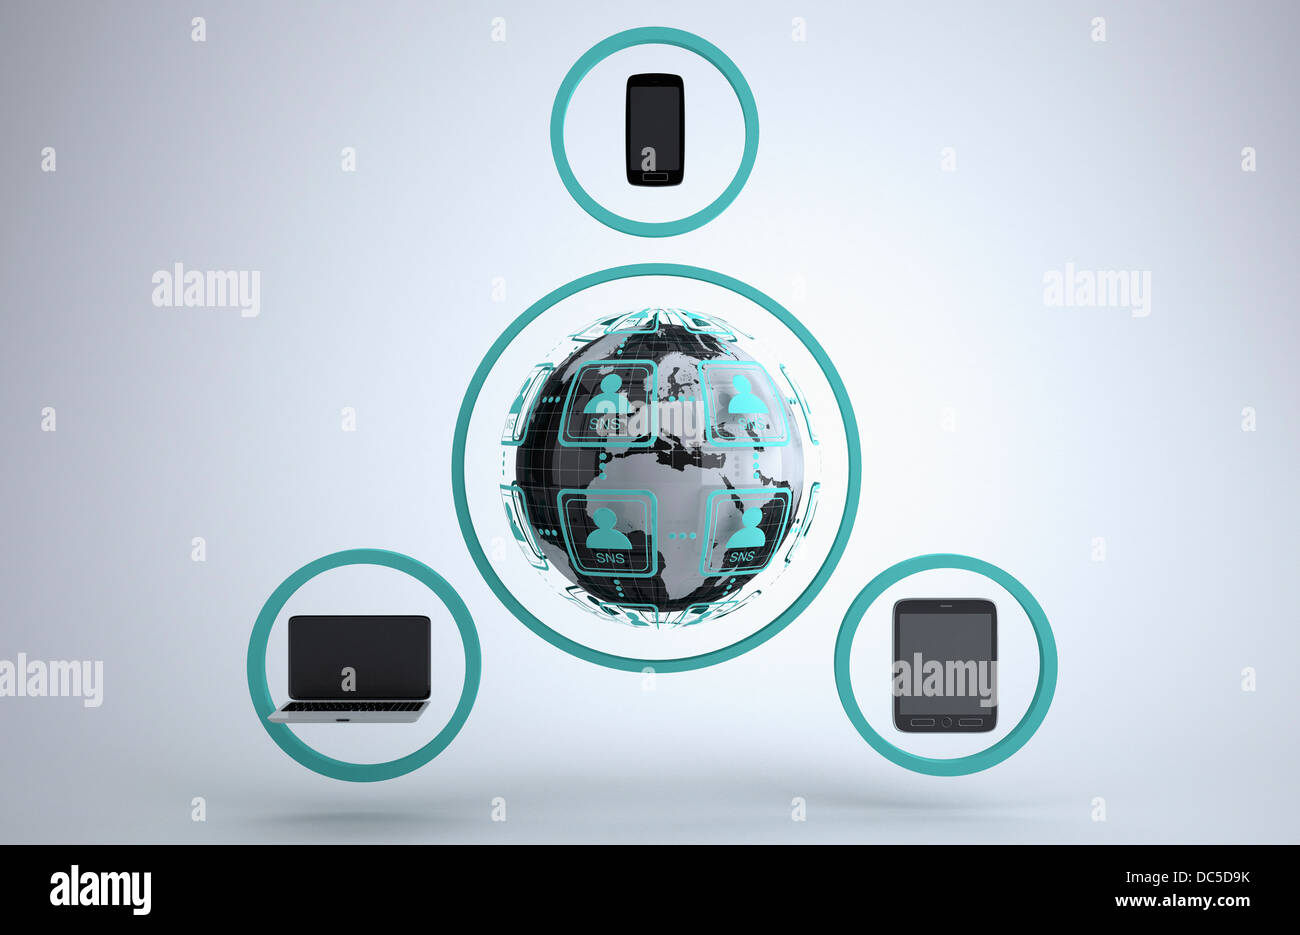 illustration of smart devices Stock Photo